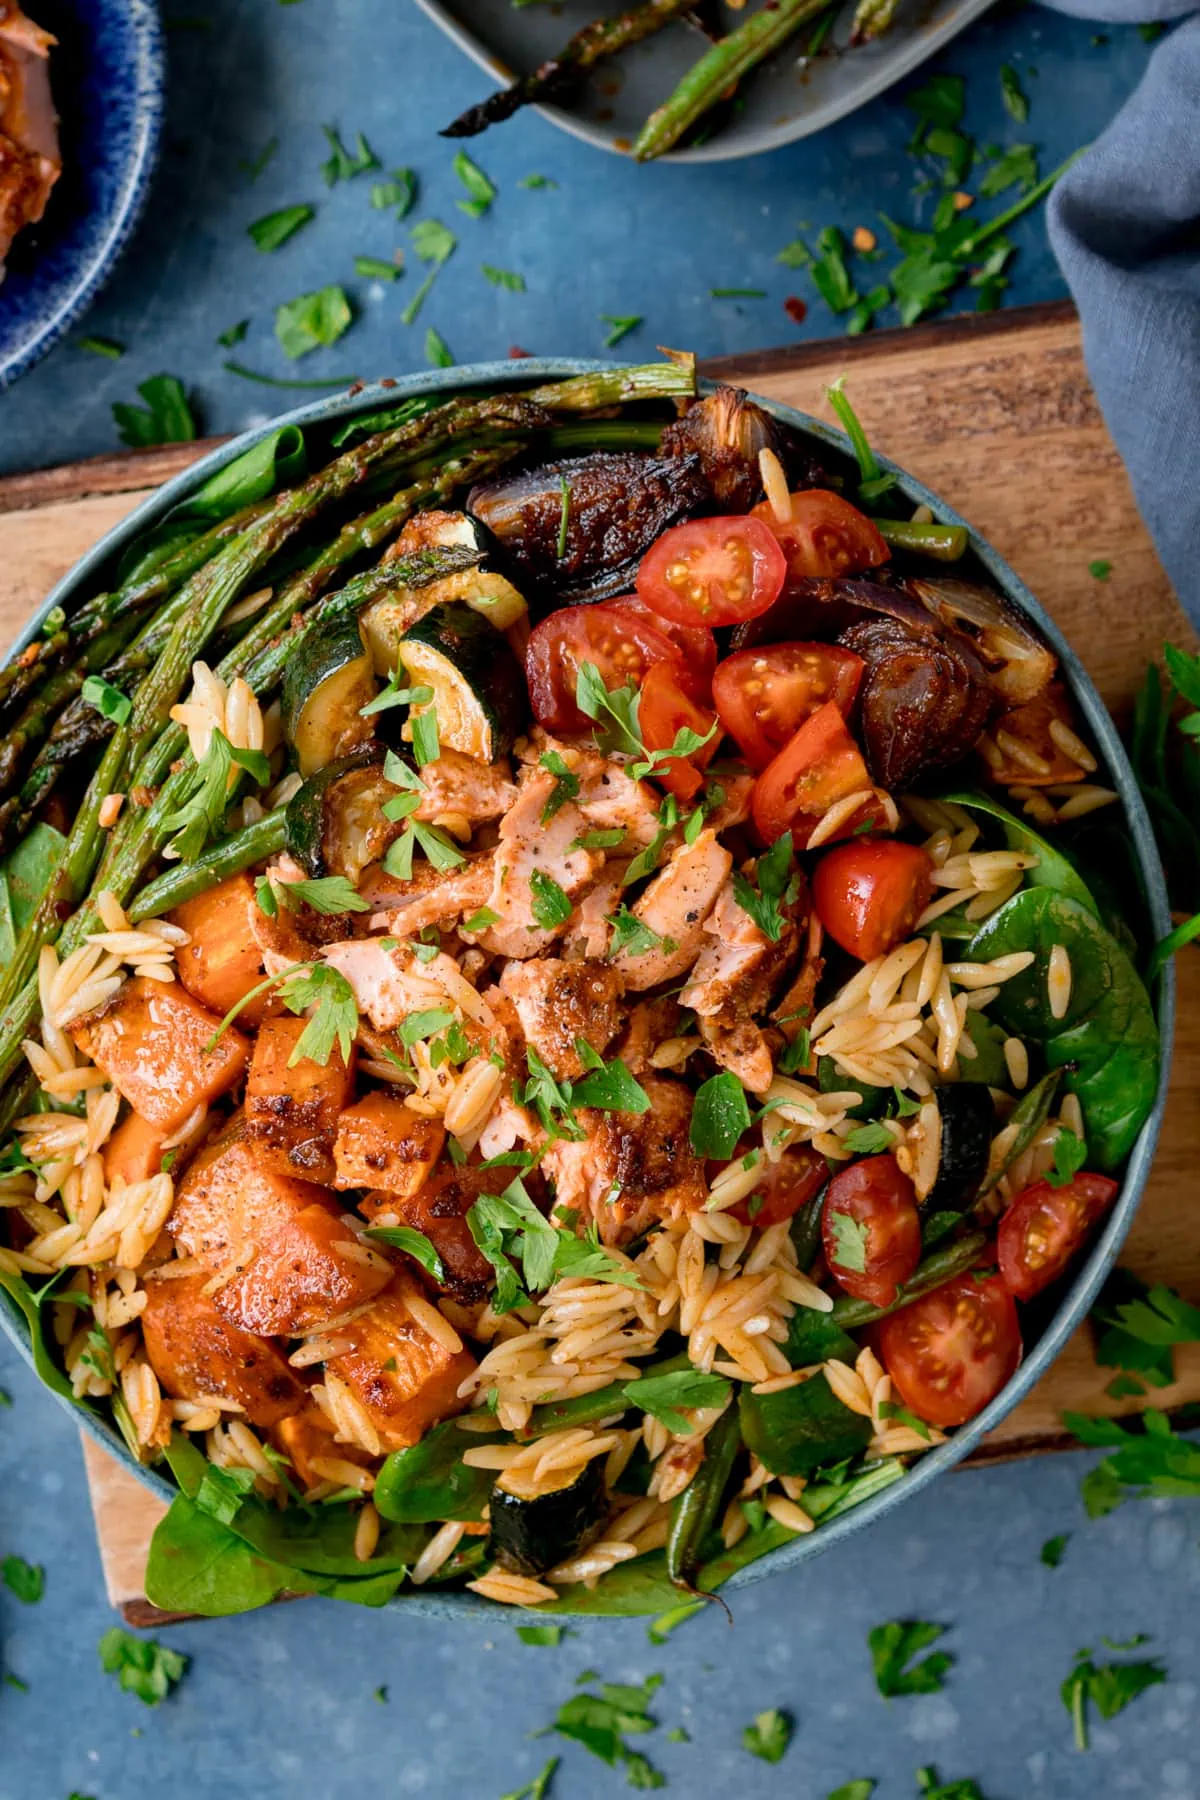 A bowl full of orzo pasta salad with salmon and roasted vegetables on a wooden board with a blue background.